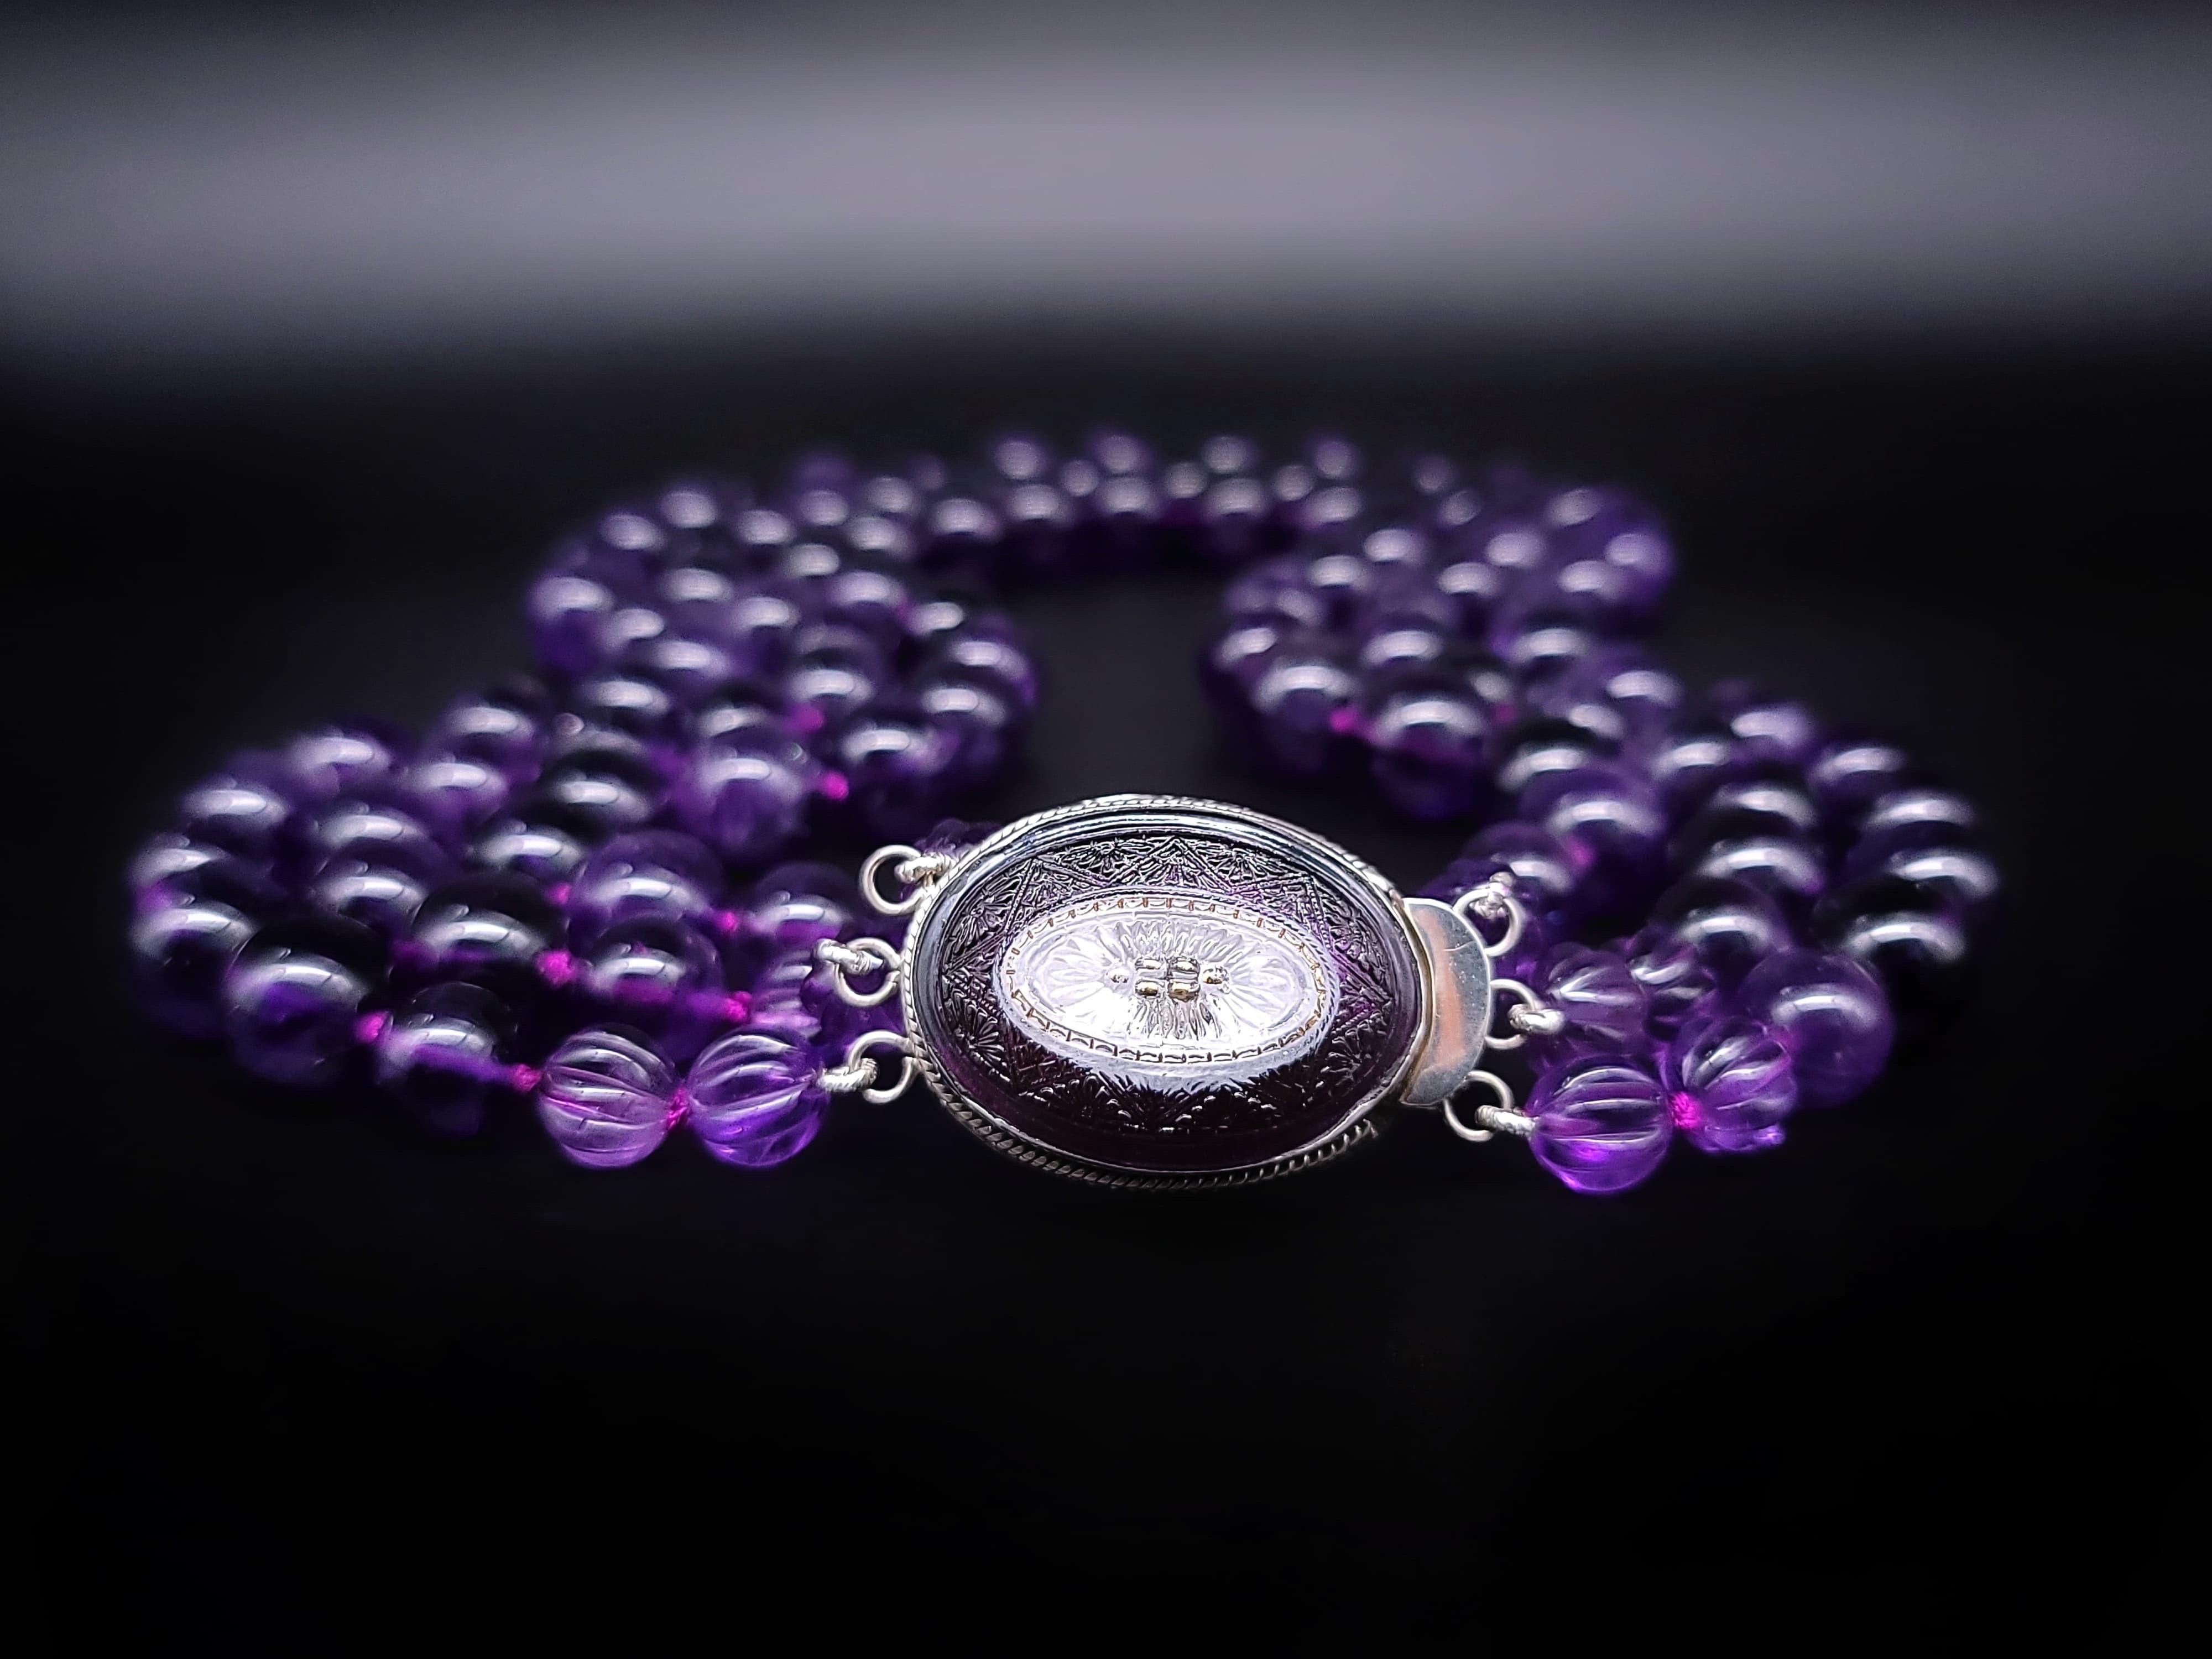 A.Jeschel  Amethyst necklace with a Vintage Venetian glass clasp. 12